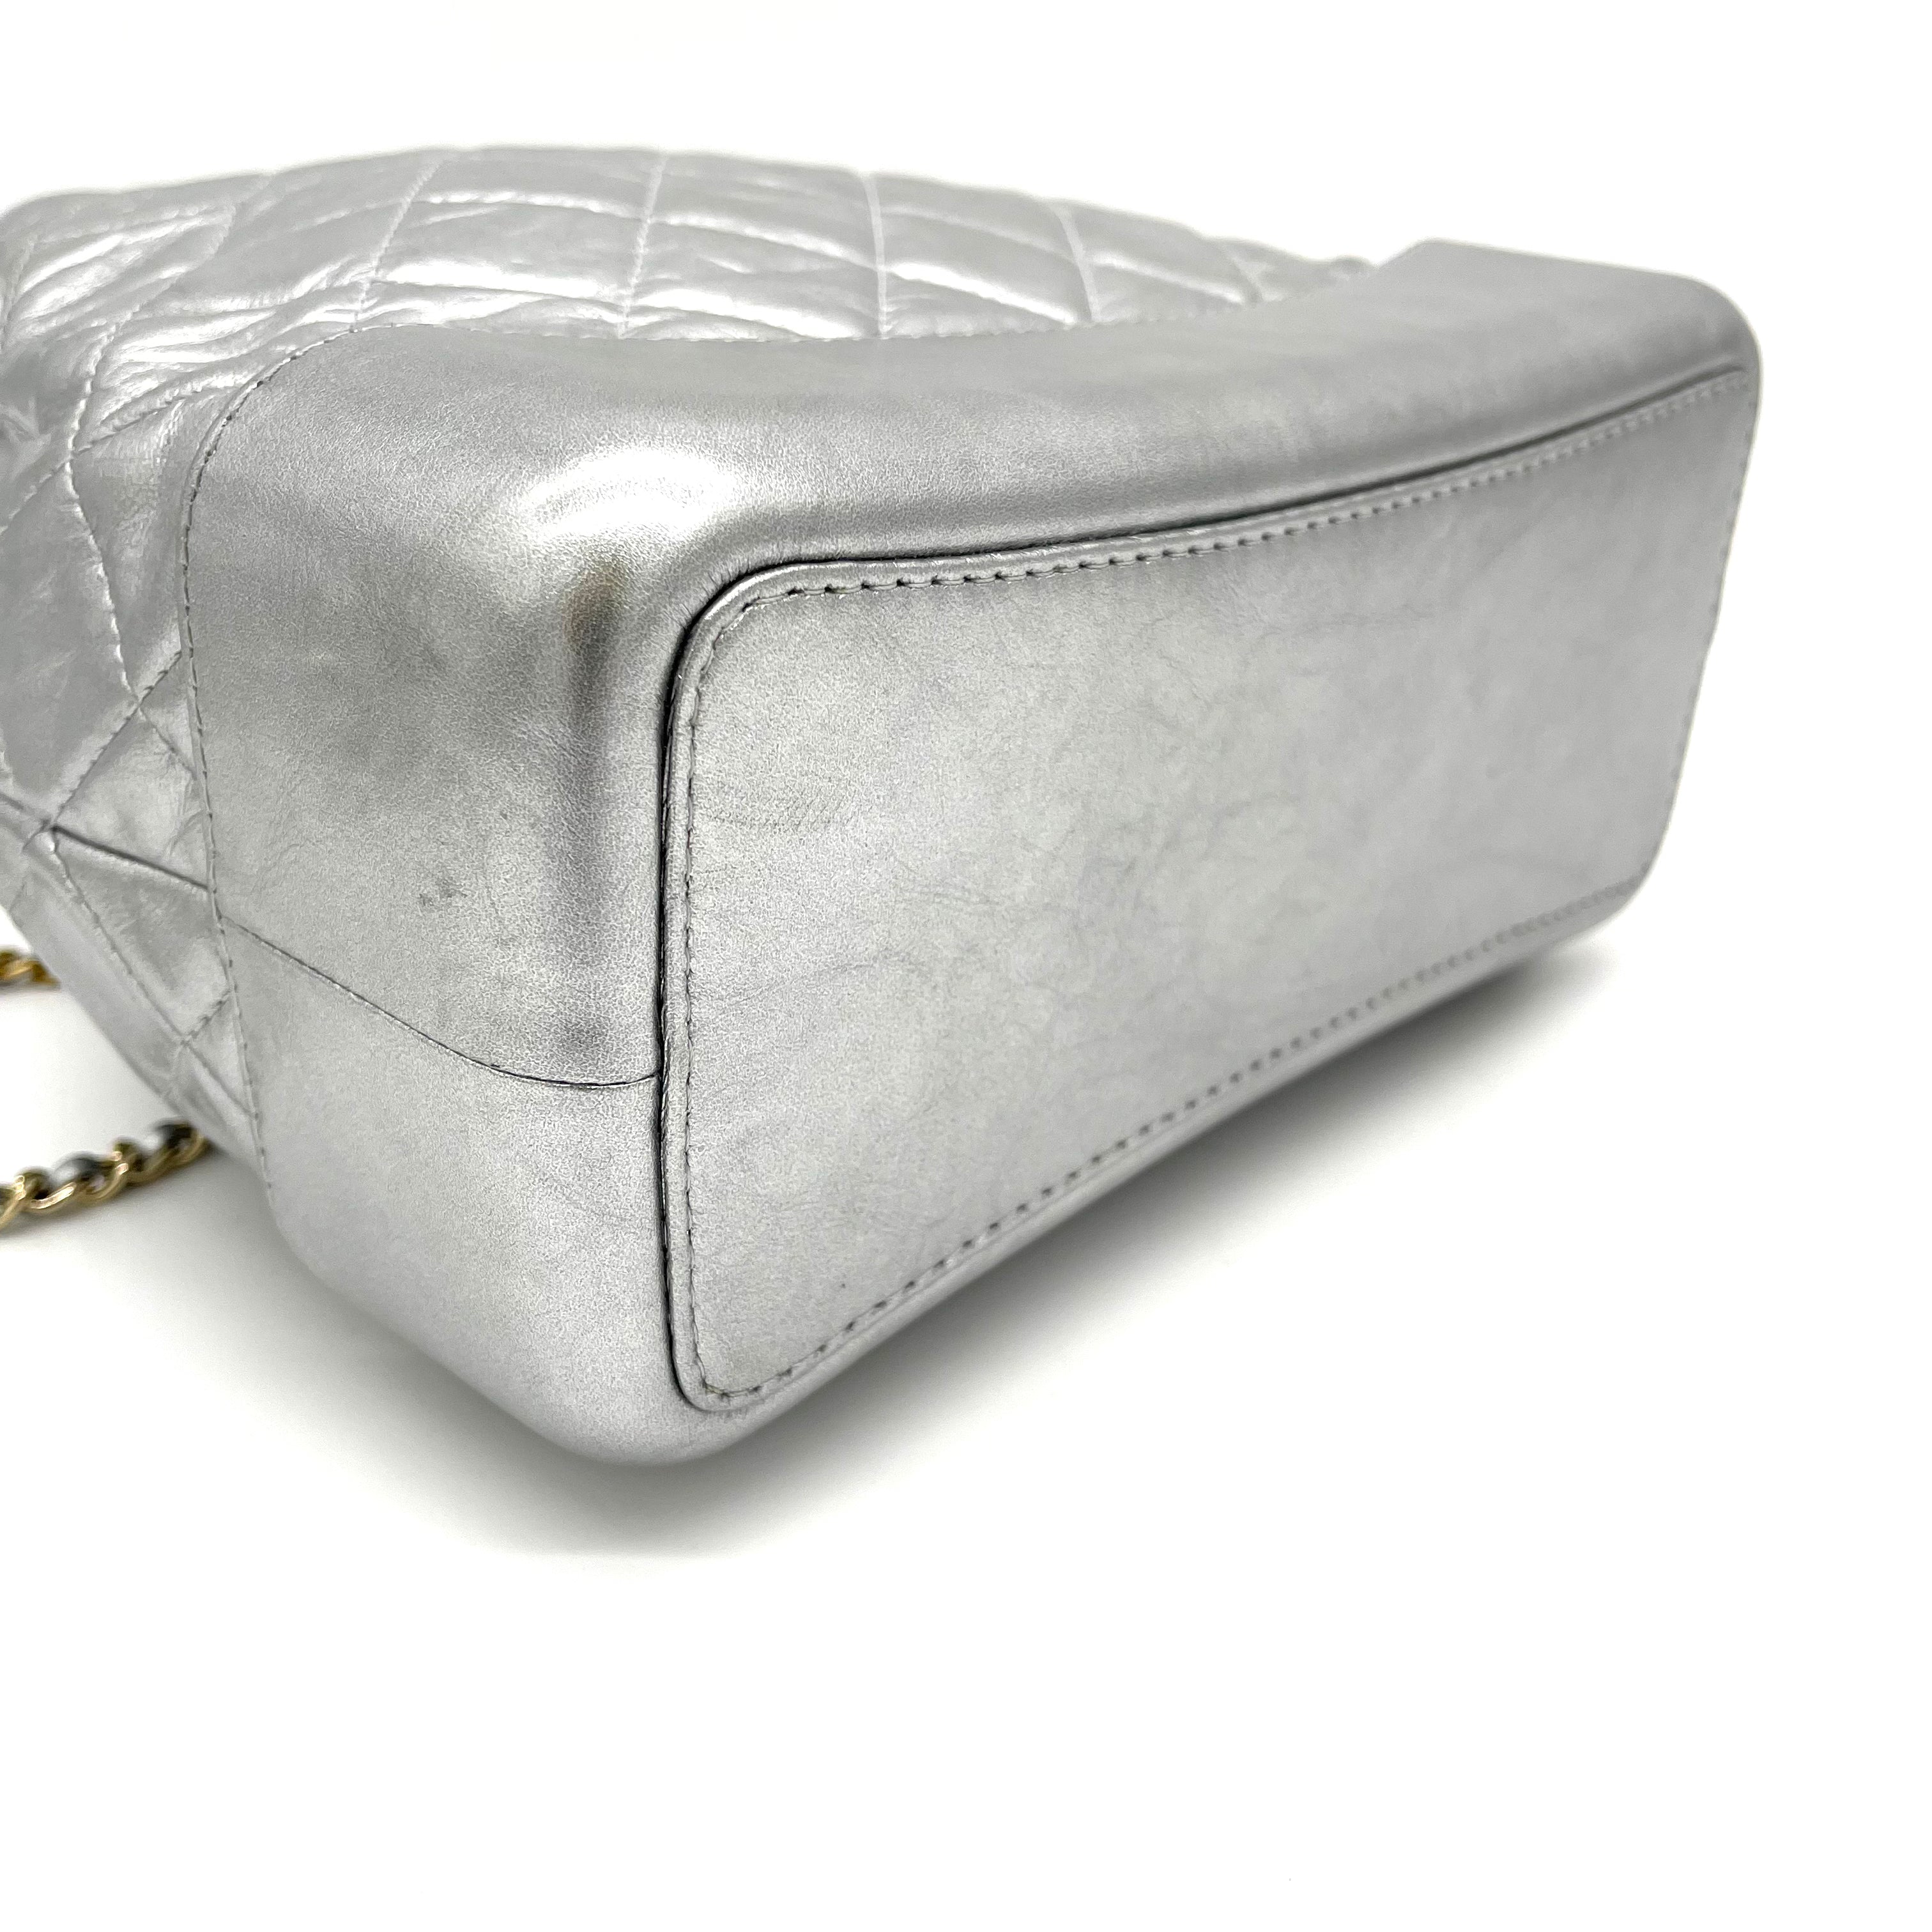 Chanel Silver Quilted Calfskin Leather Gabrielle Large Hobo Bag